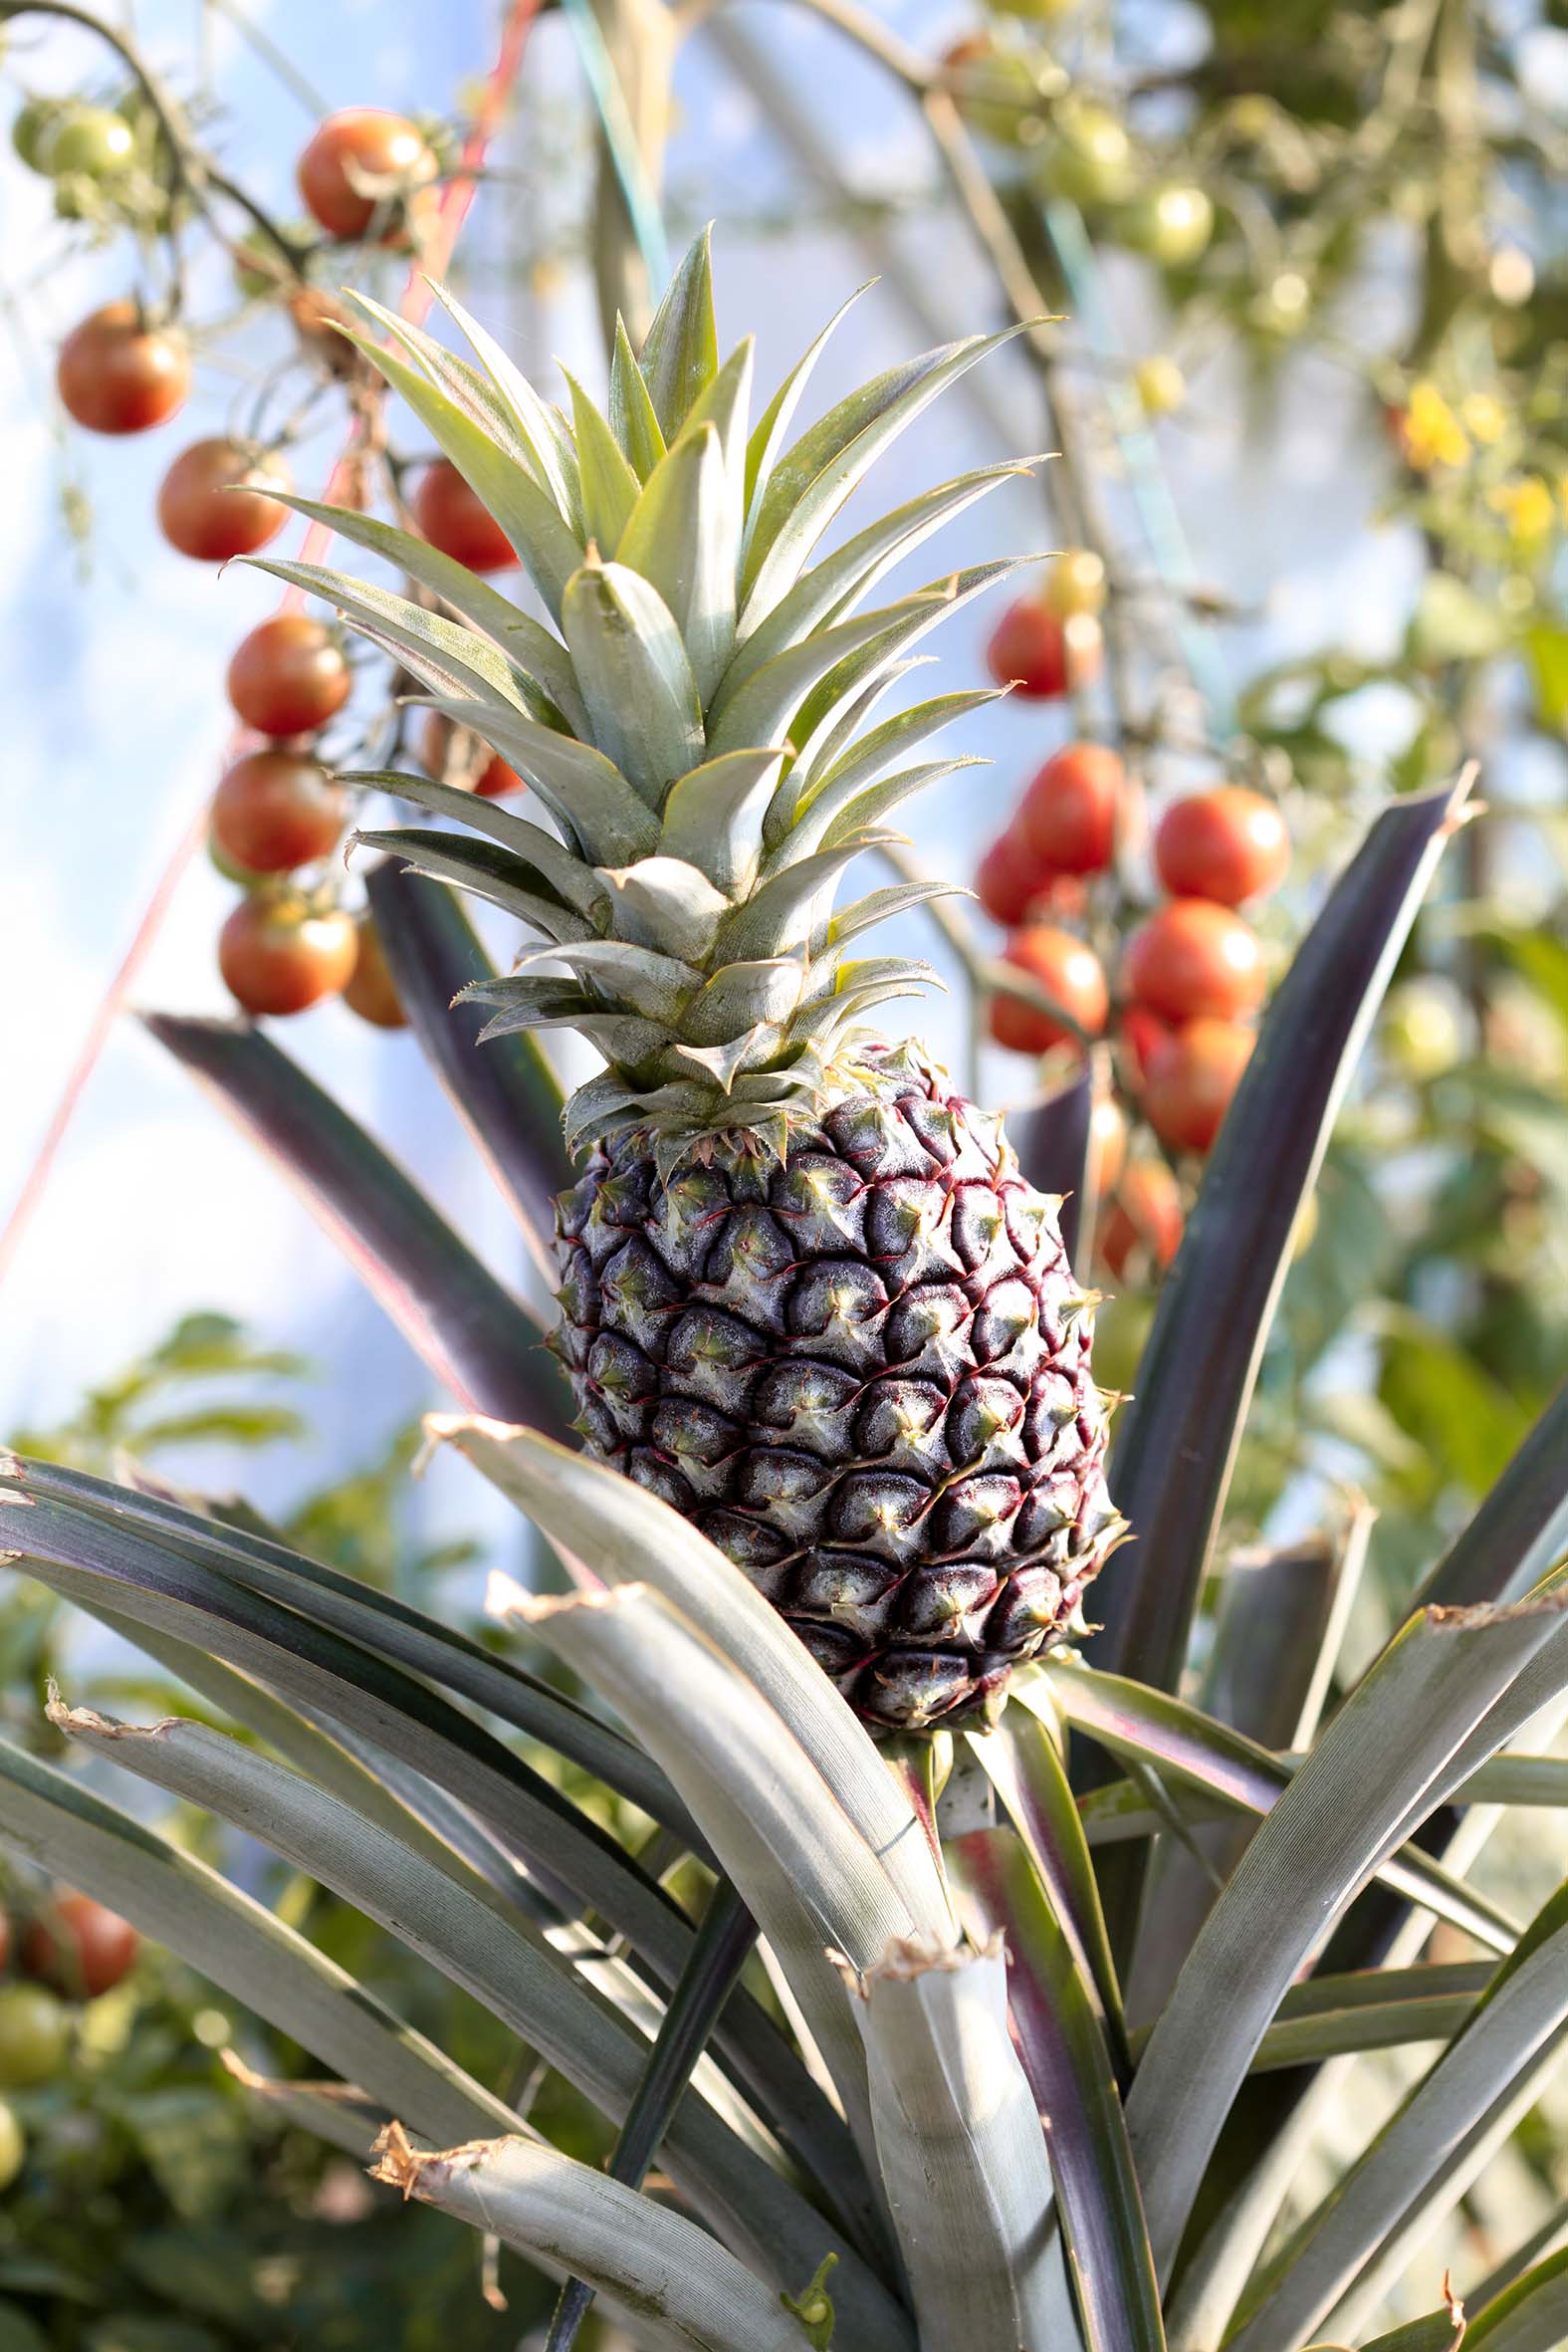 Pineapple growing in a tree